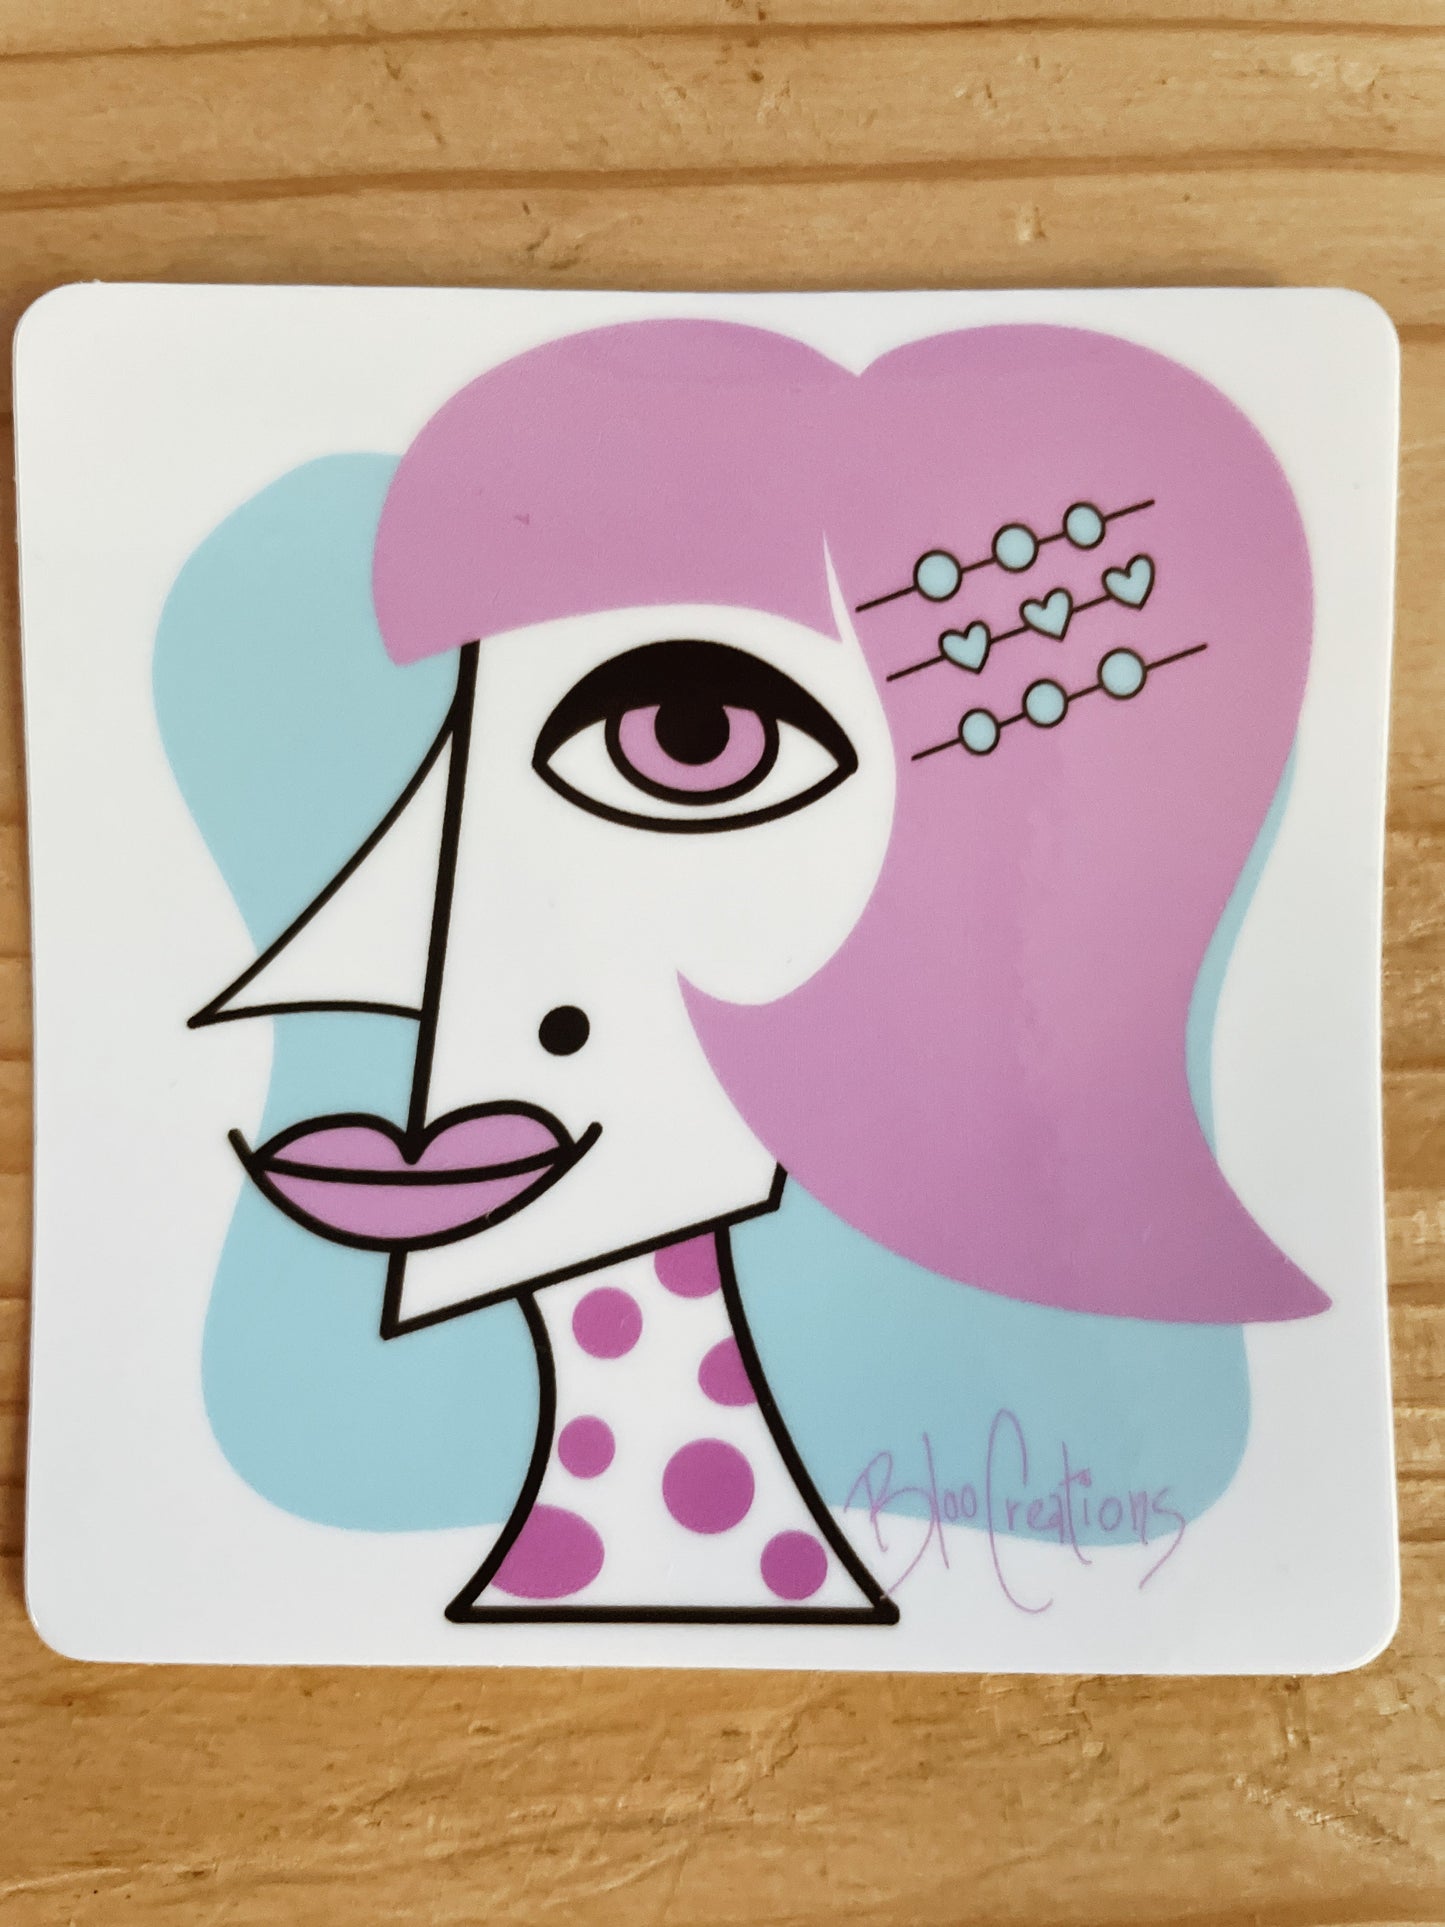 Glossy artistic stickers - 3x3 inches - Waterproof